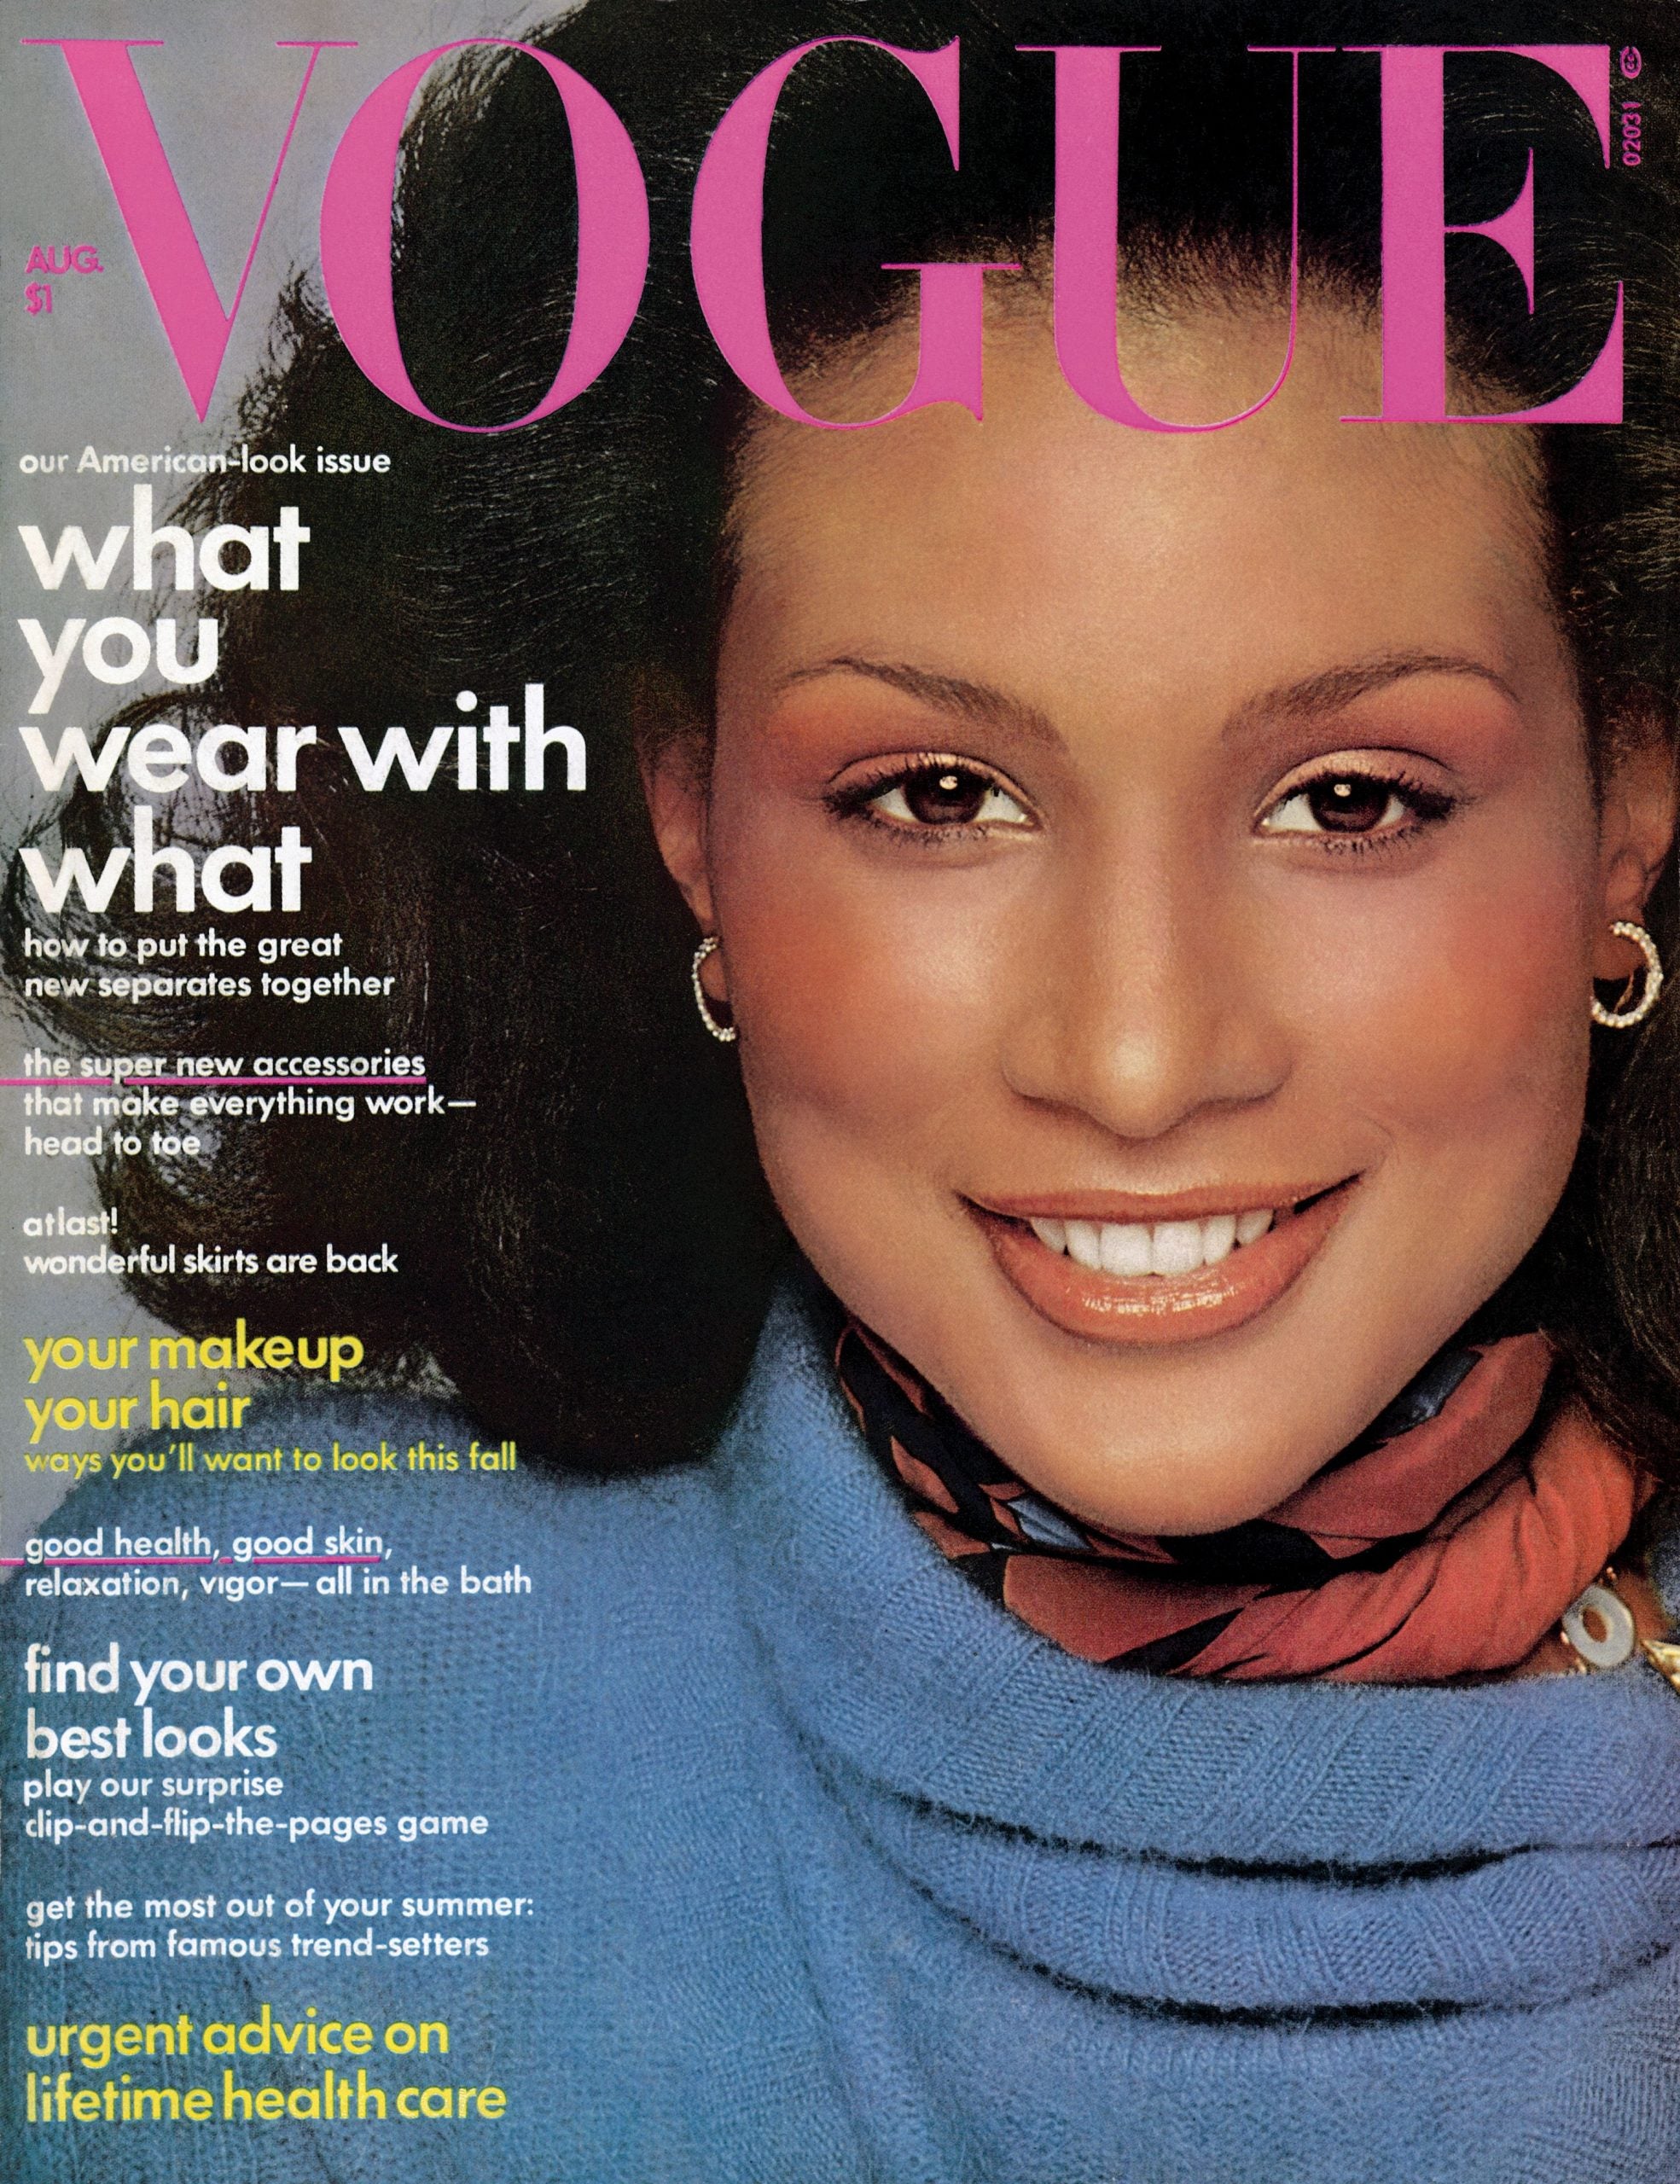 Beverly Johnson Speaks On Bill Cosby Attack And Sexual Violence In Fashion From CFDA Stage